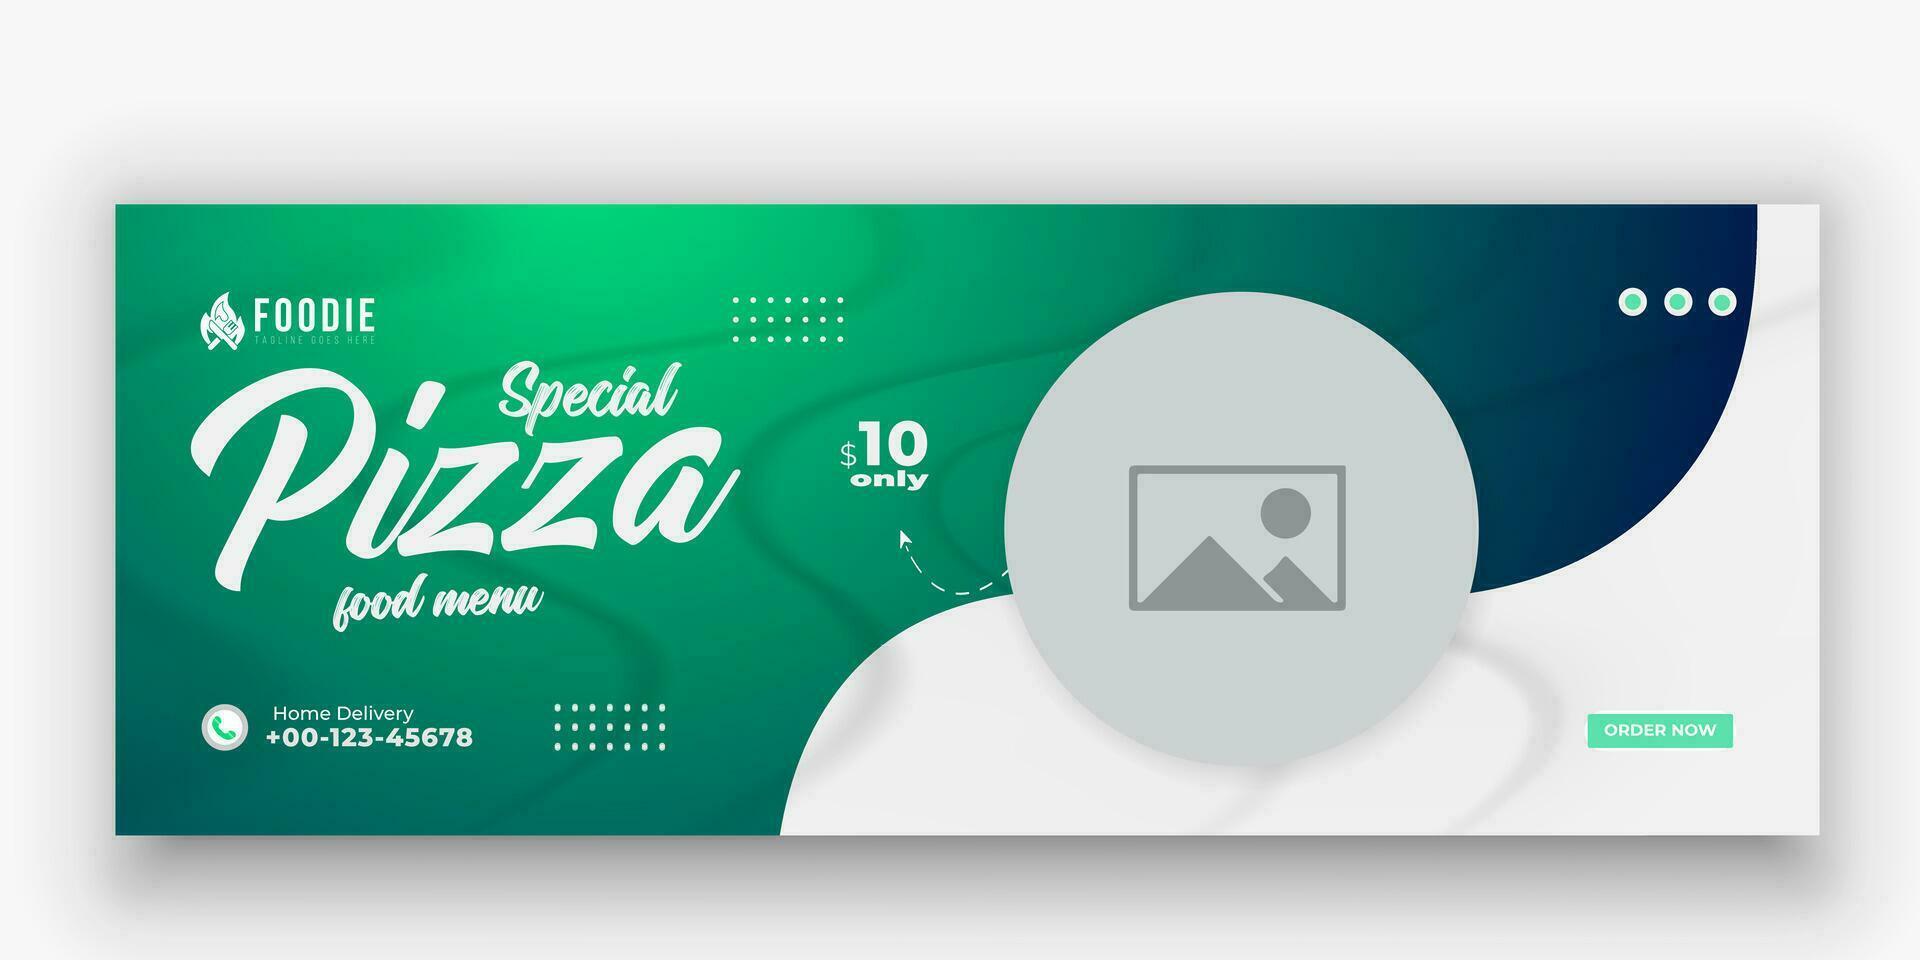 Delicious pizza food menu social media cover, post template for restaurant business, special fresh and healthy burger timeline cover design, webinar for advertising campaign with colorful background vector